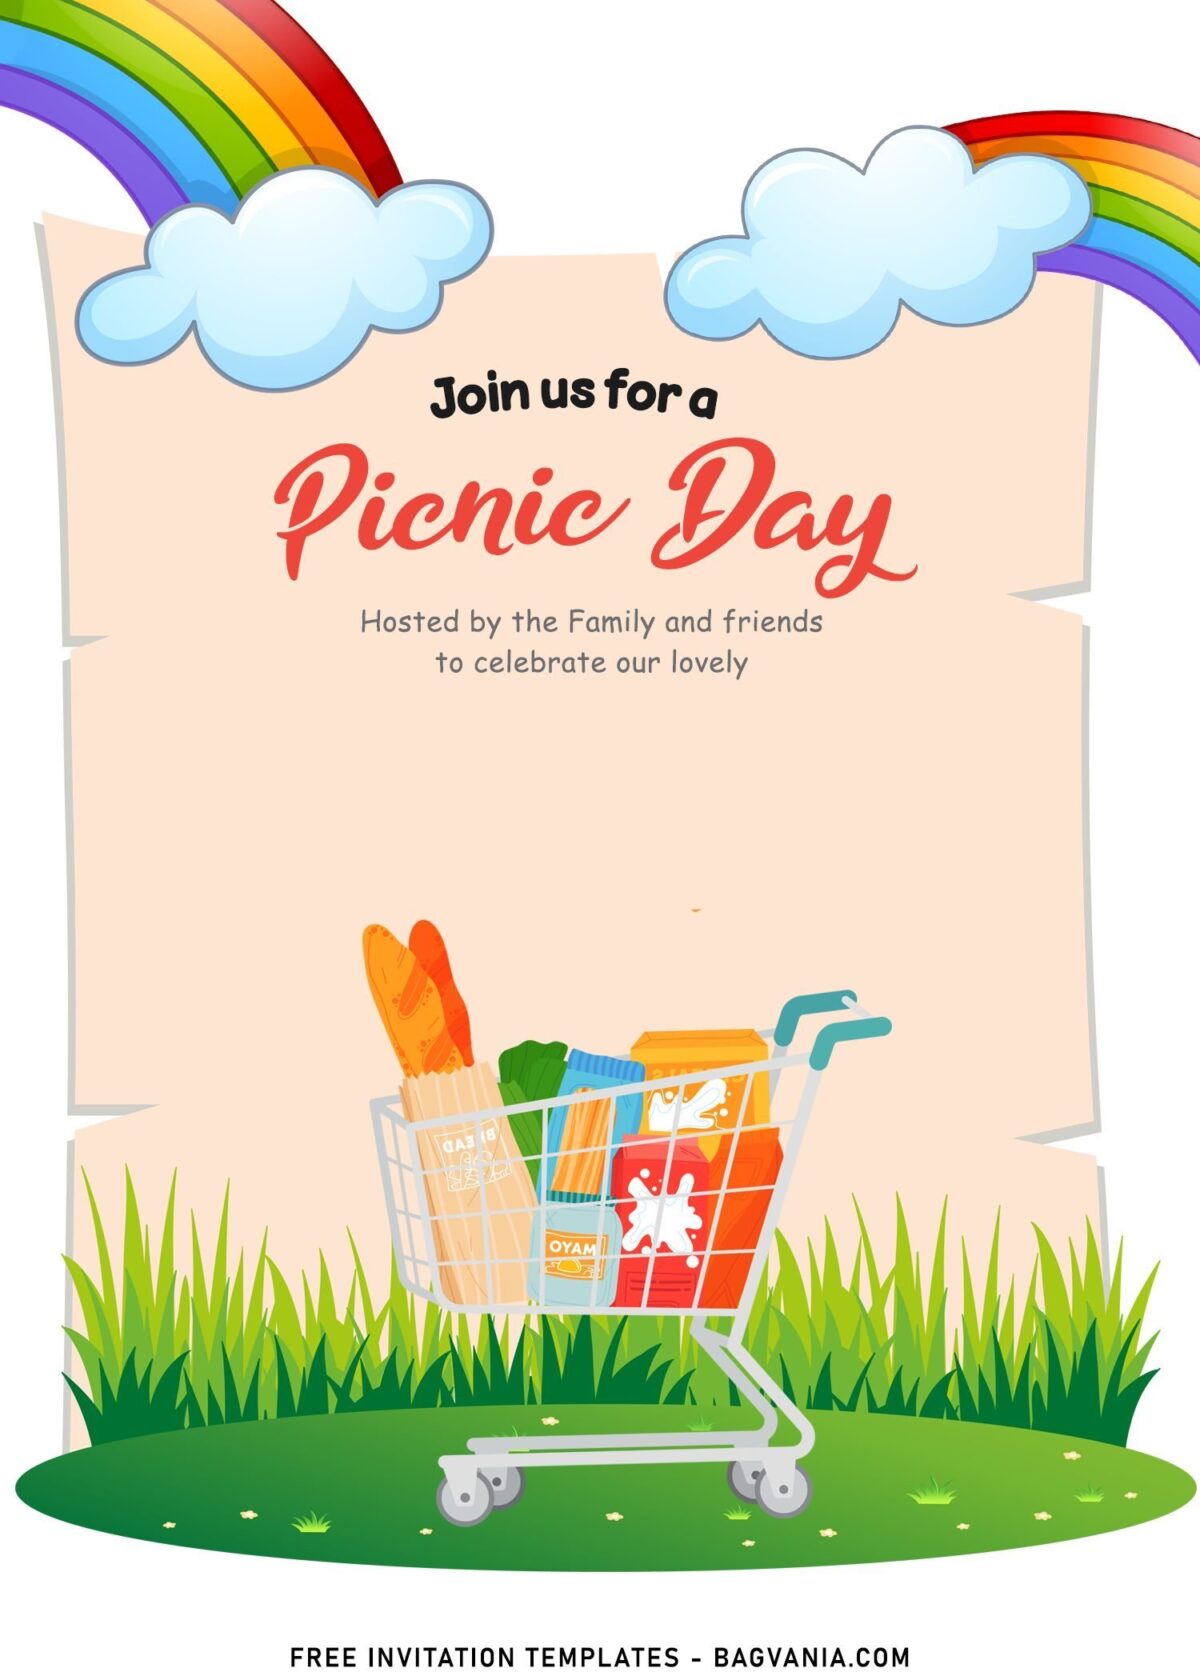 11+ Kids Picnic Day Birthday Invitation Templates Perfect For Spring with beautiful rainbow